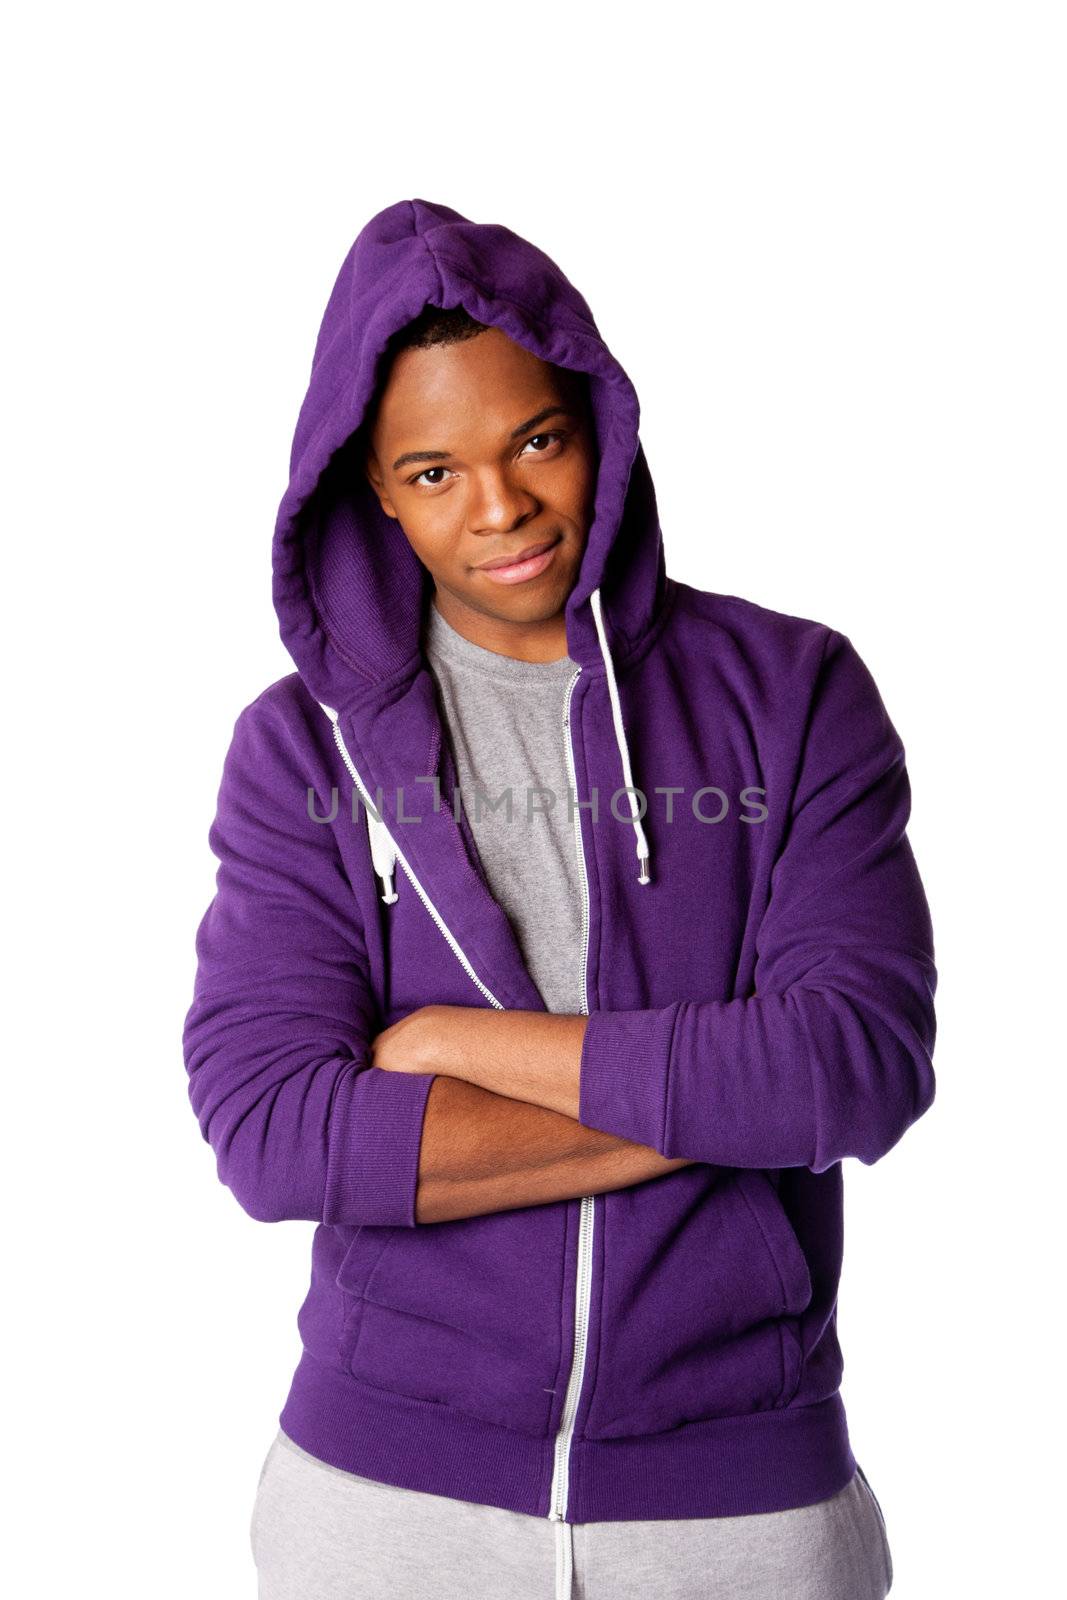 Young handsome man ready for sports wearing purple hooded sweatshirt and gray training pants, isolated.